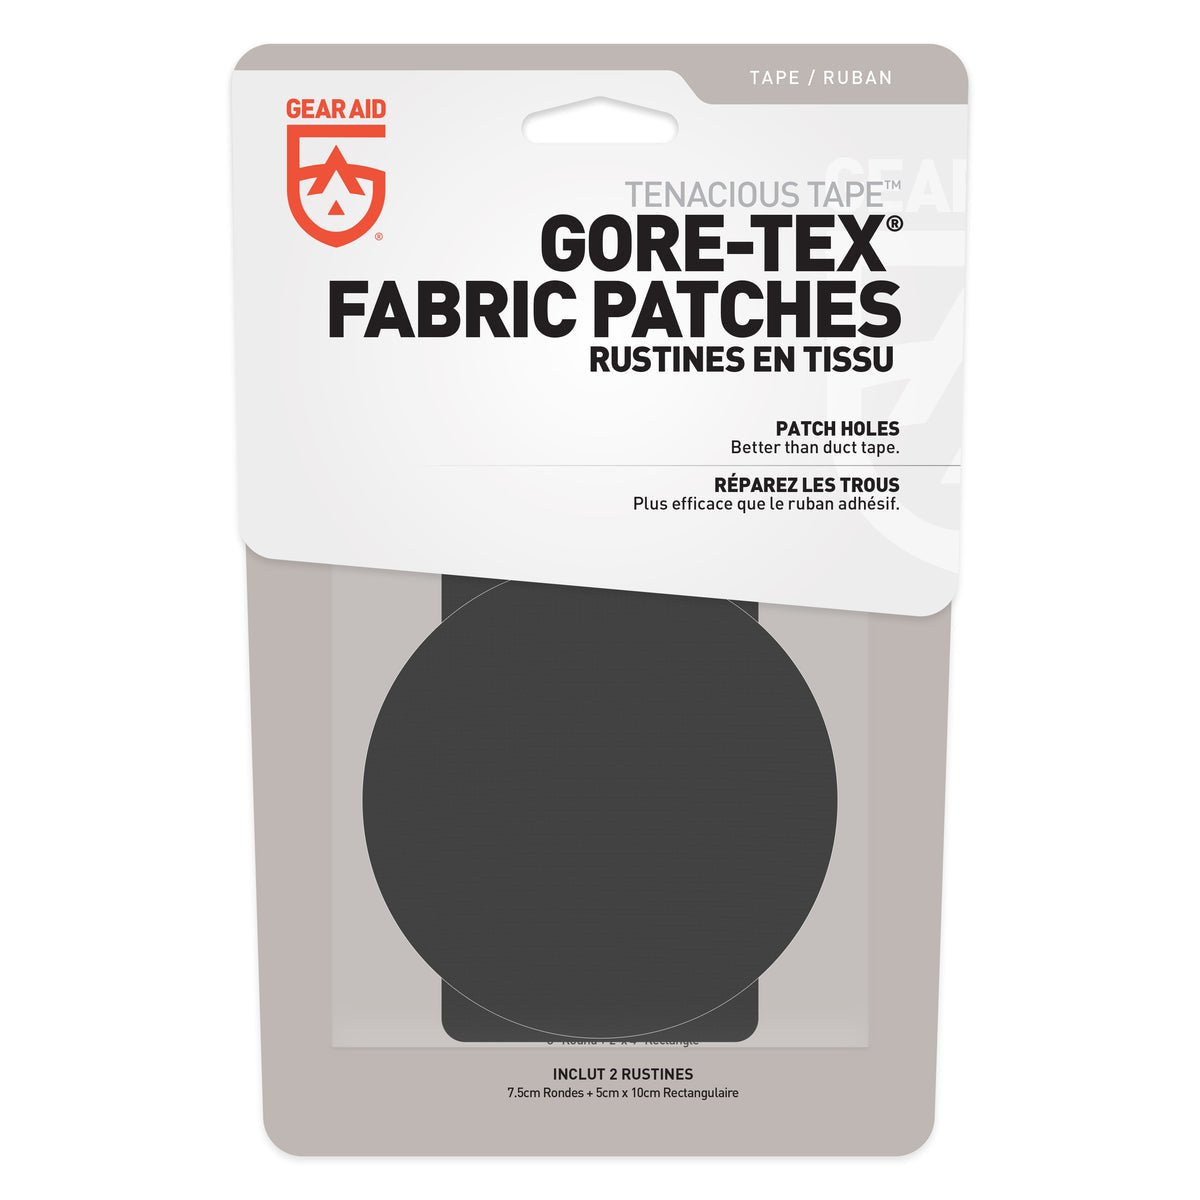 GEAR AID Tenacious Tape Gore-TEX Fabric Patches for Quickly Fixing Holes  and Tears in Jackets, Gloves, Rain and Ski Pants | Black | 2.5” x 2.8”